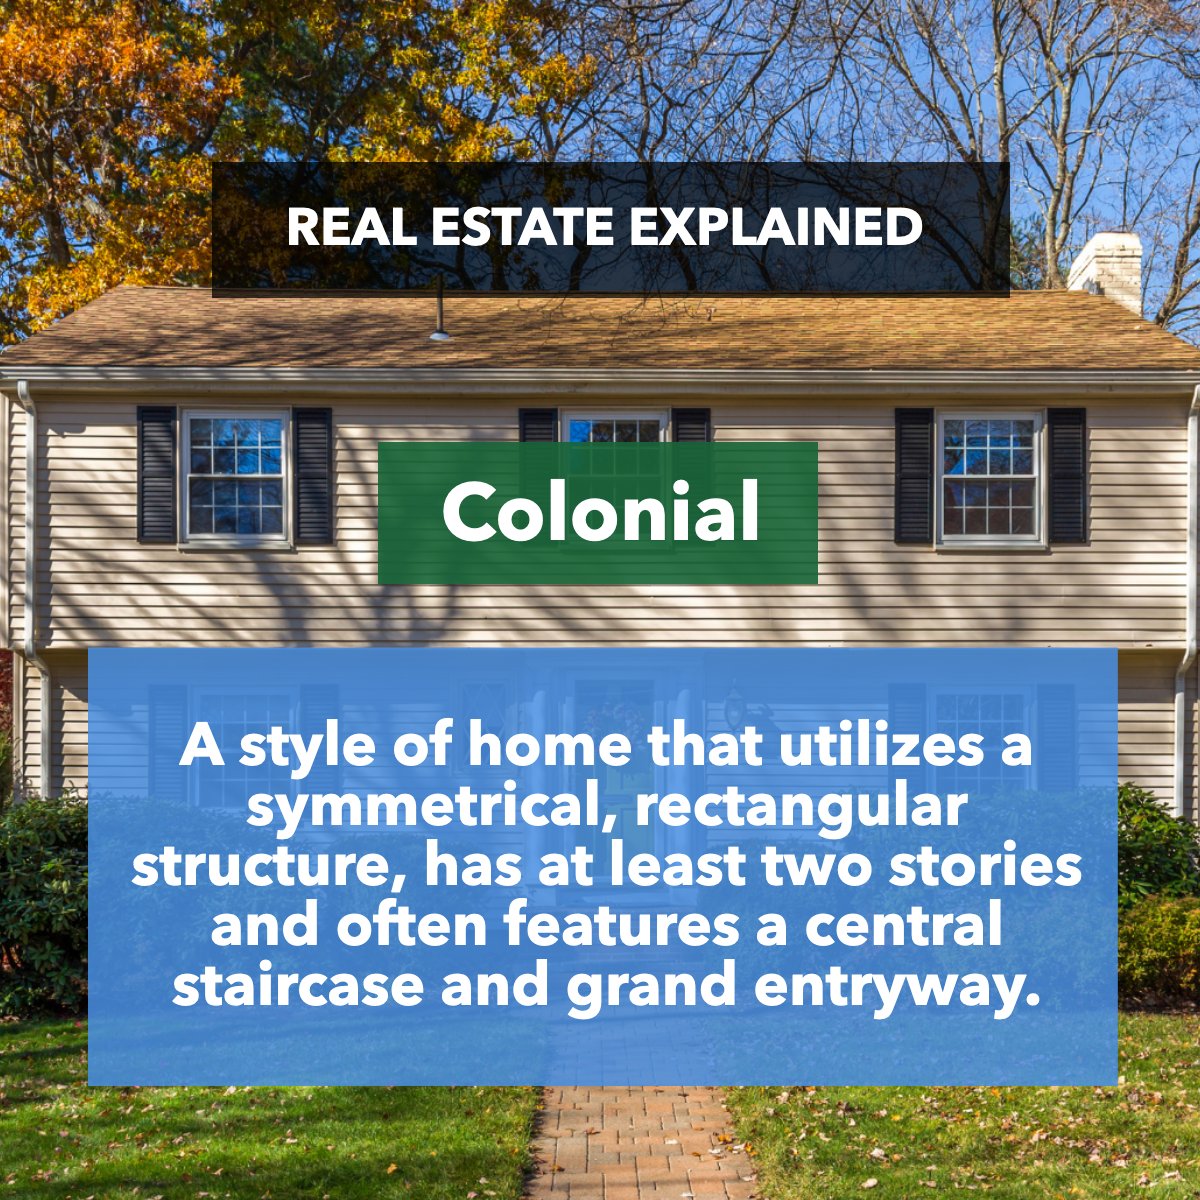 Did you know what a Colonial Style is? 🏡

Is this the type of house that you like?

#colonialhouse #colonialstyle #colonialhomes
 #RacingRealEstateAgent #BarrettRealEstate #StoneTreeRealEstateTeam #maricopaazrealestate #racingagent #arizonarealestate